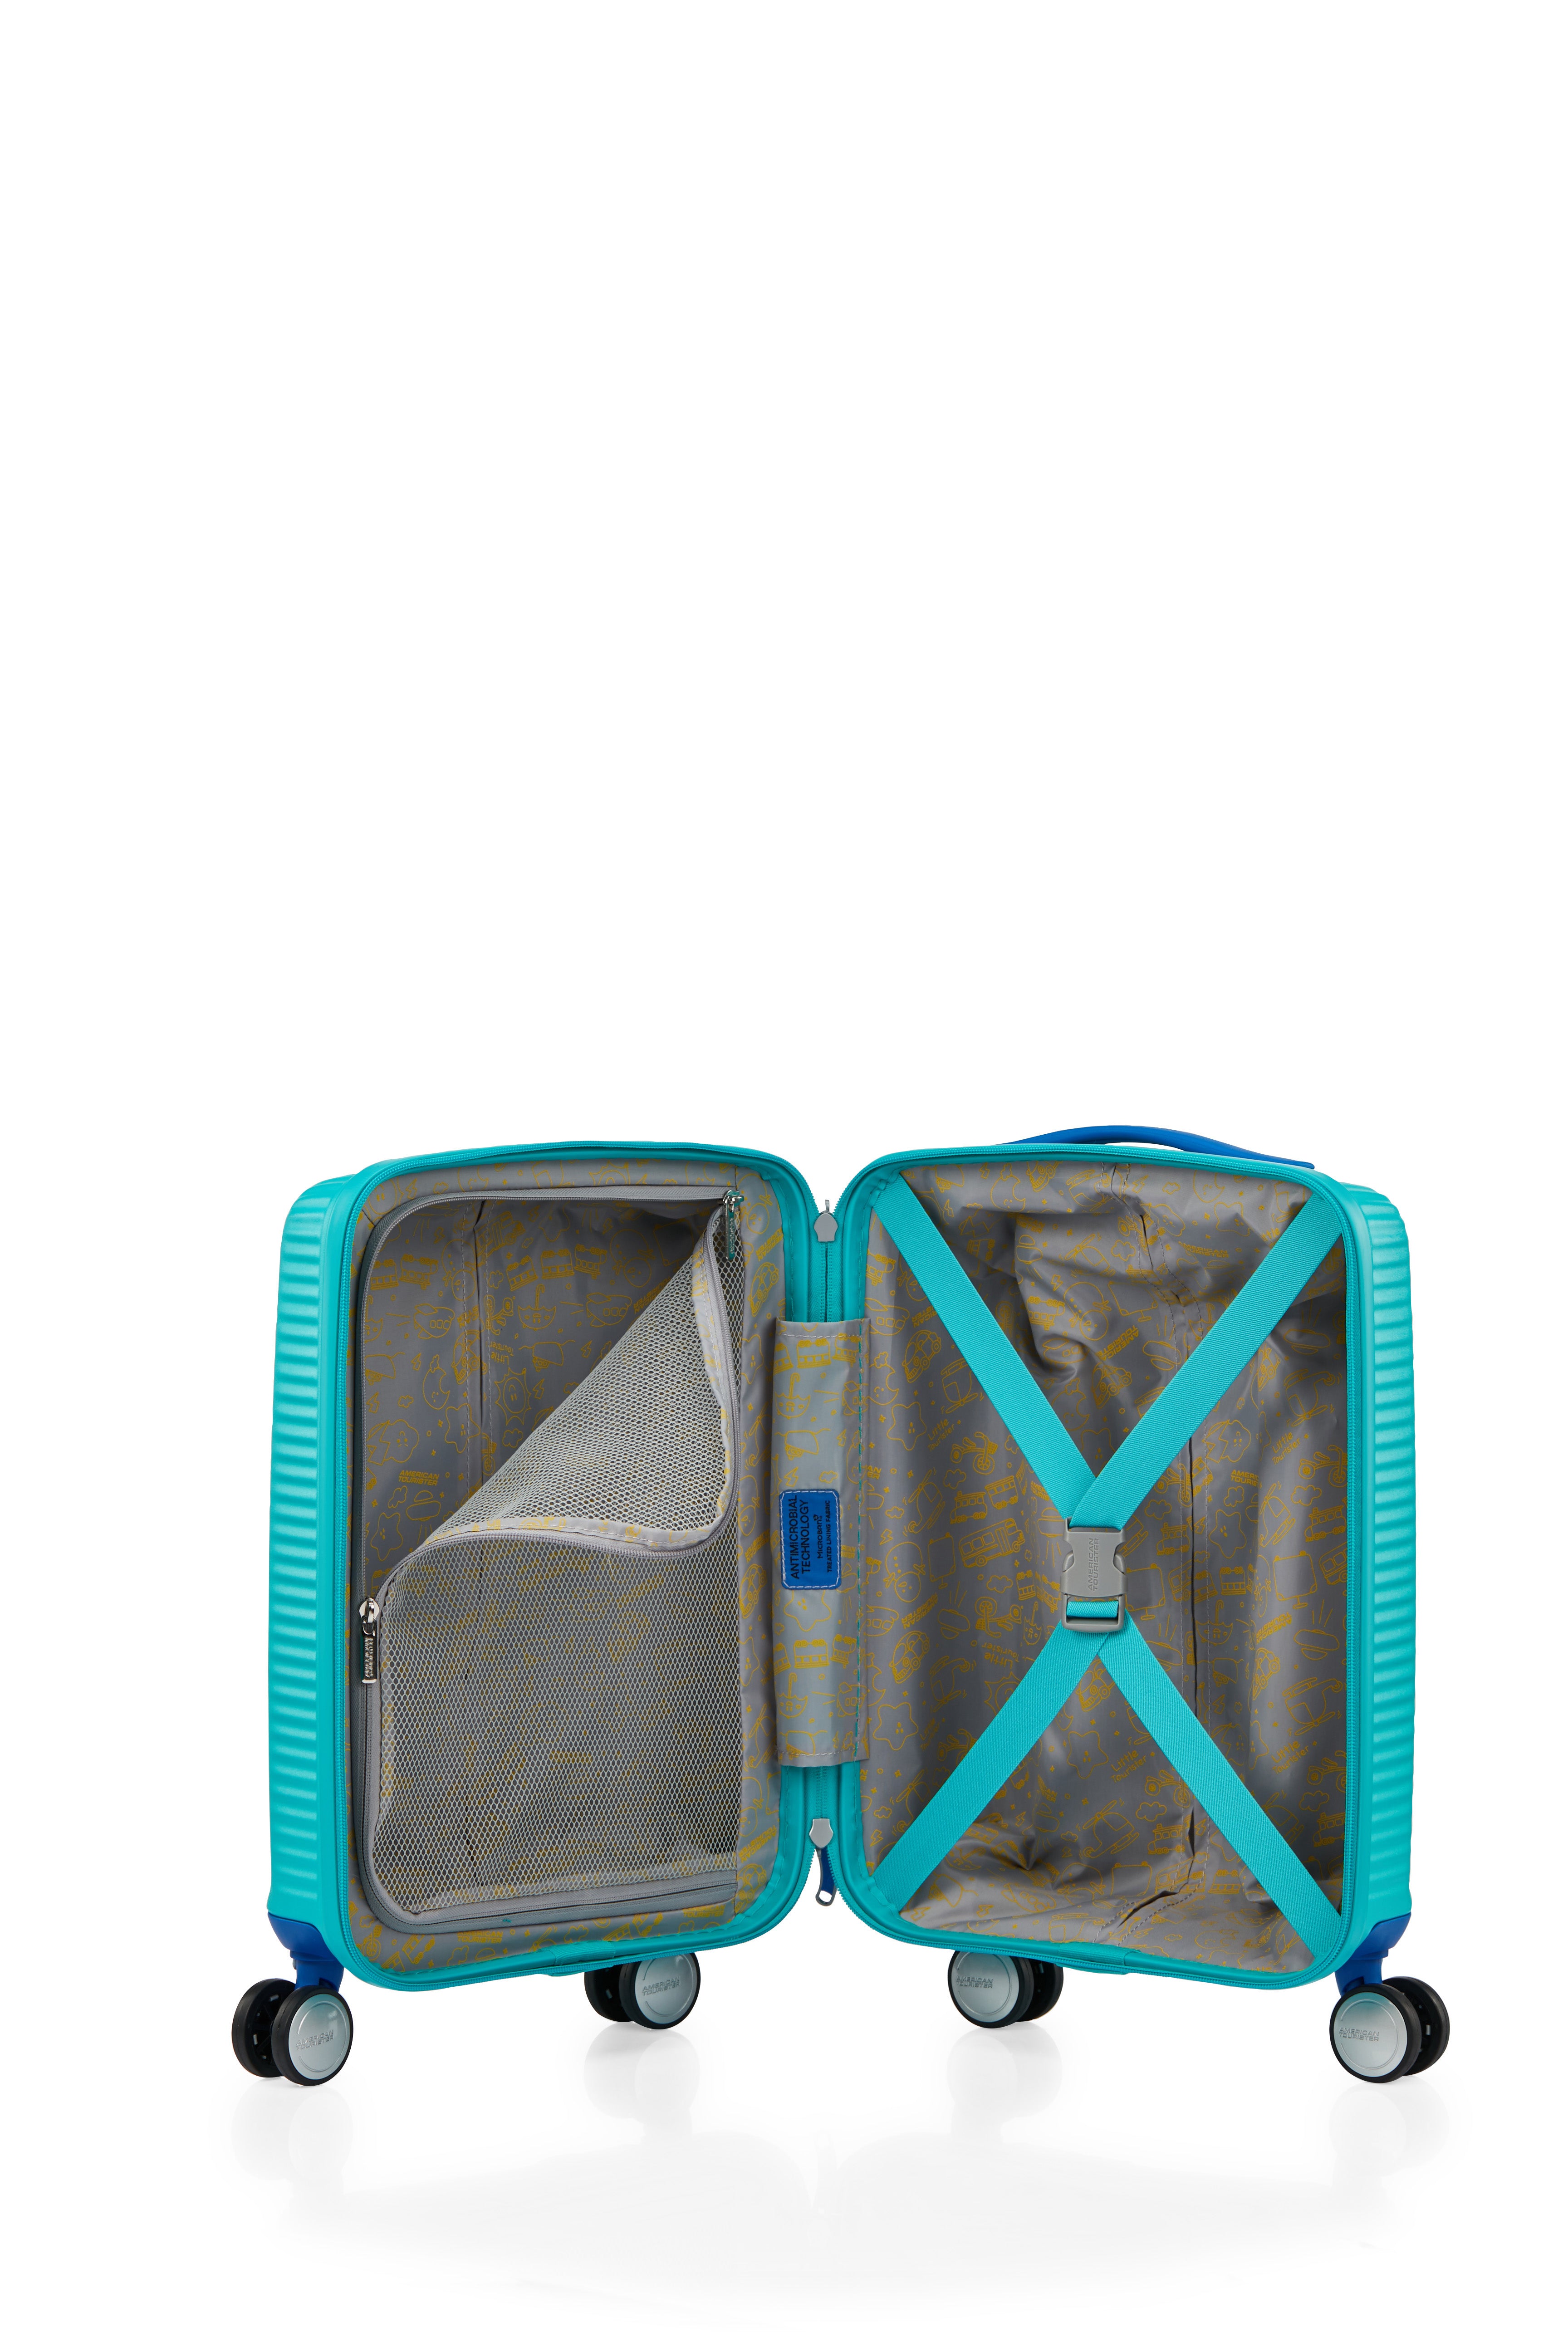 American Tourister - Little Curio 47cm Spinner - Teal/Blue-7